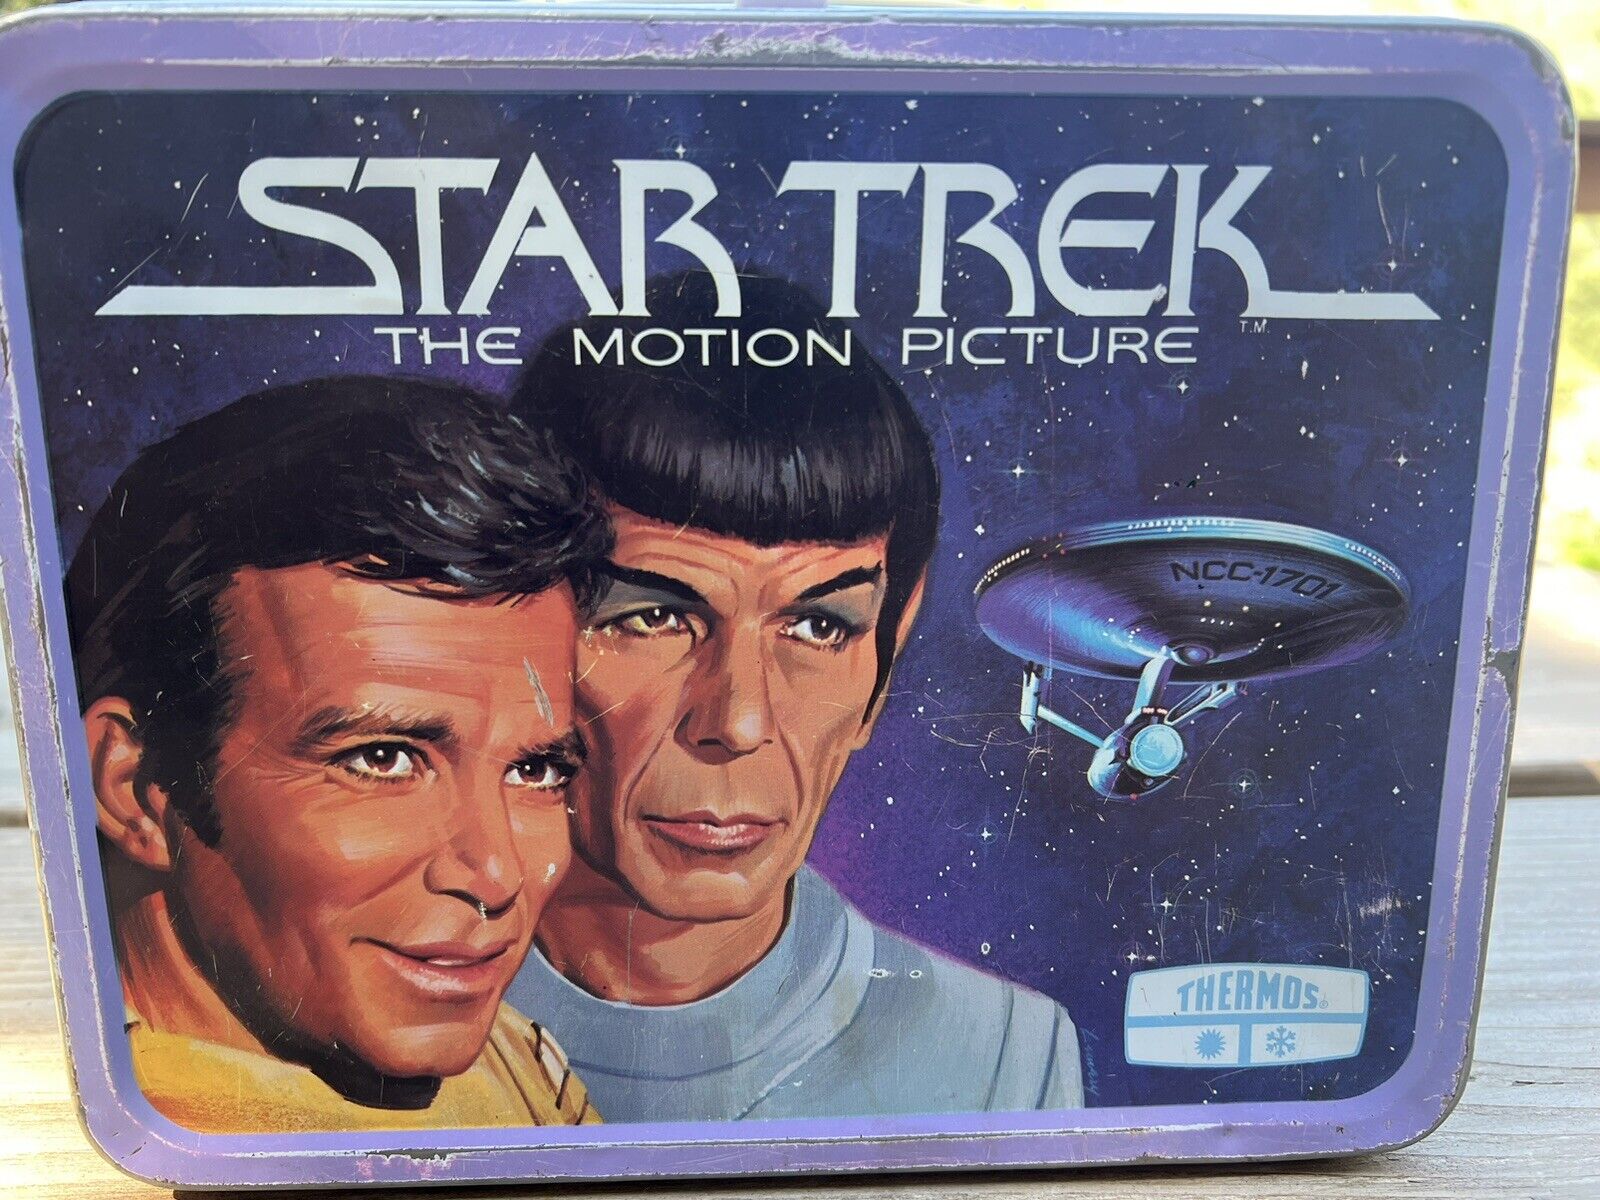 Vintage 1979 Thermos Star Trek The Motion Picture Lunch Box. No Thermos.